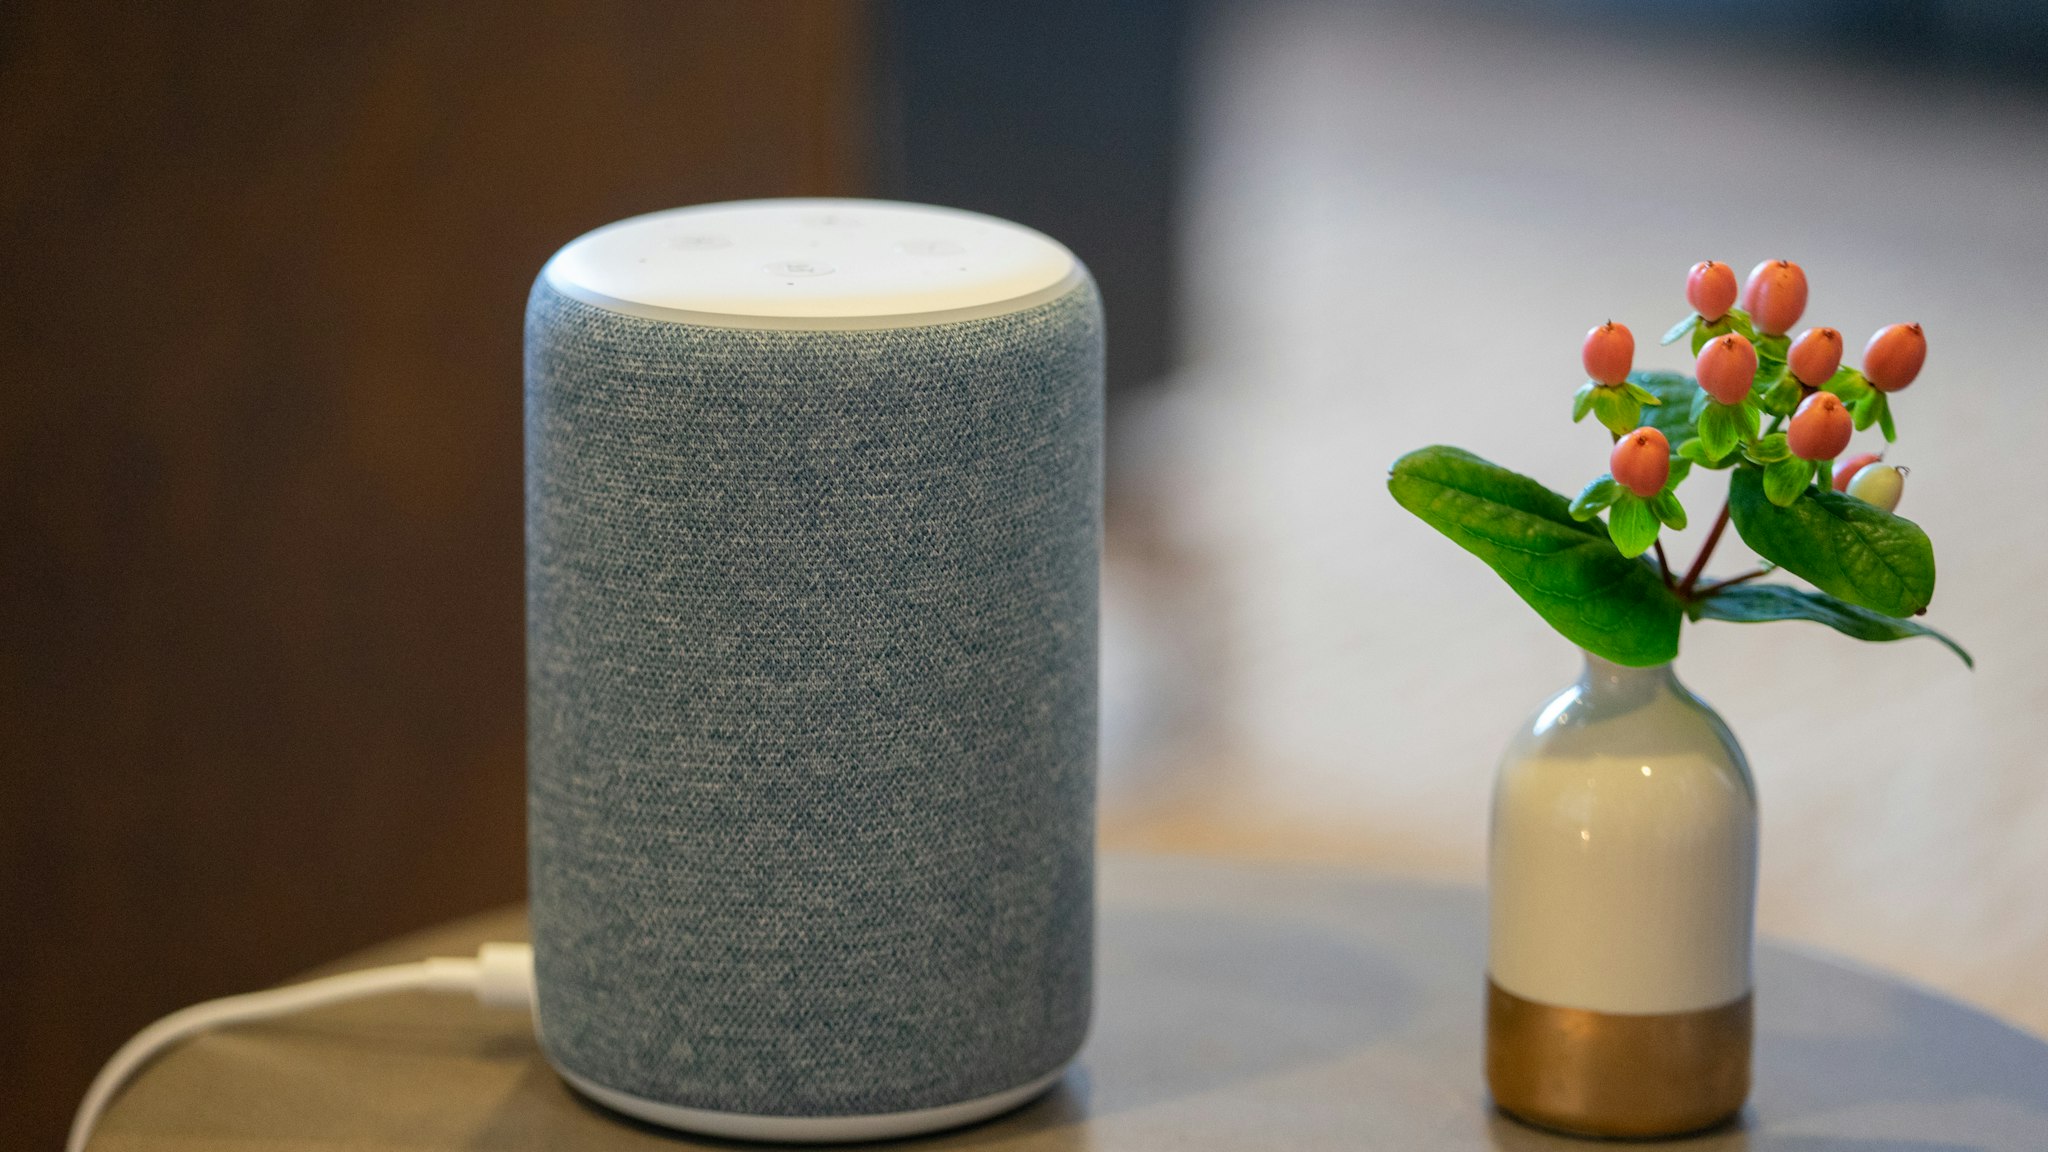 An Amazon.com Inc. Echo Plus device is displayed during an unveiling event at the company's headquarters in Seattle, Washington, U.S., on Wednesday, Sept. 25, 2019. Amazon.com Inc. defended the privacy features of its Alexa digital assistant -- and introduced some new tools to reassure users -- following months of debate about the practices of the technology giant and its largest competitors. Photographer: Chloe Collyer/Bloomberg via Getty Images